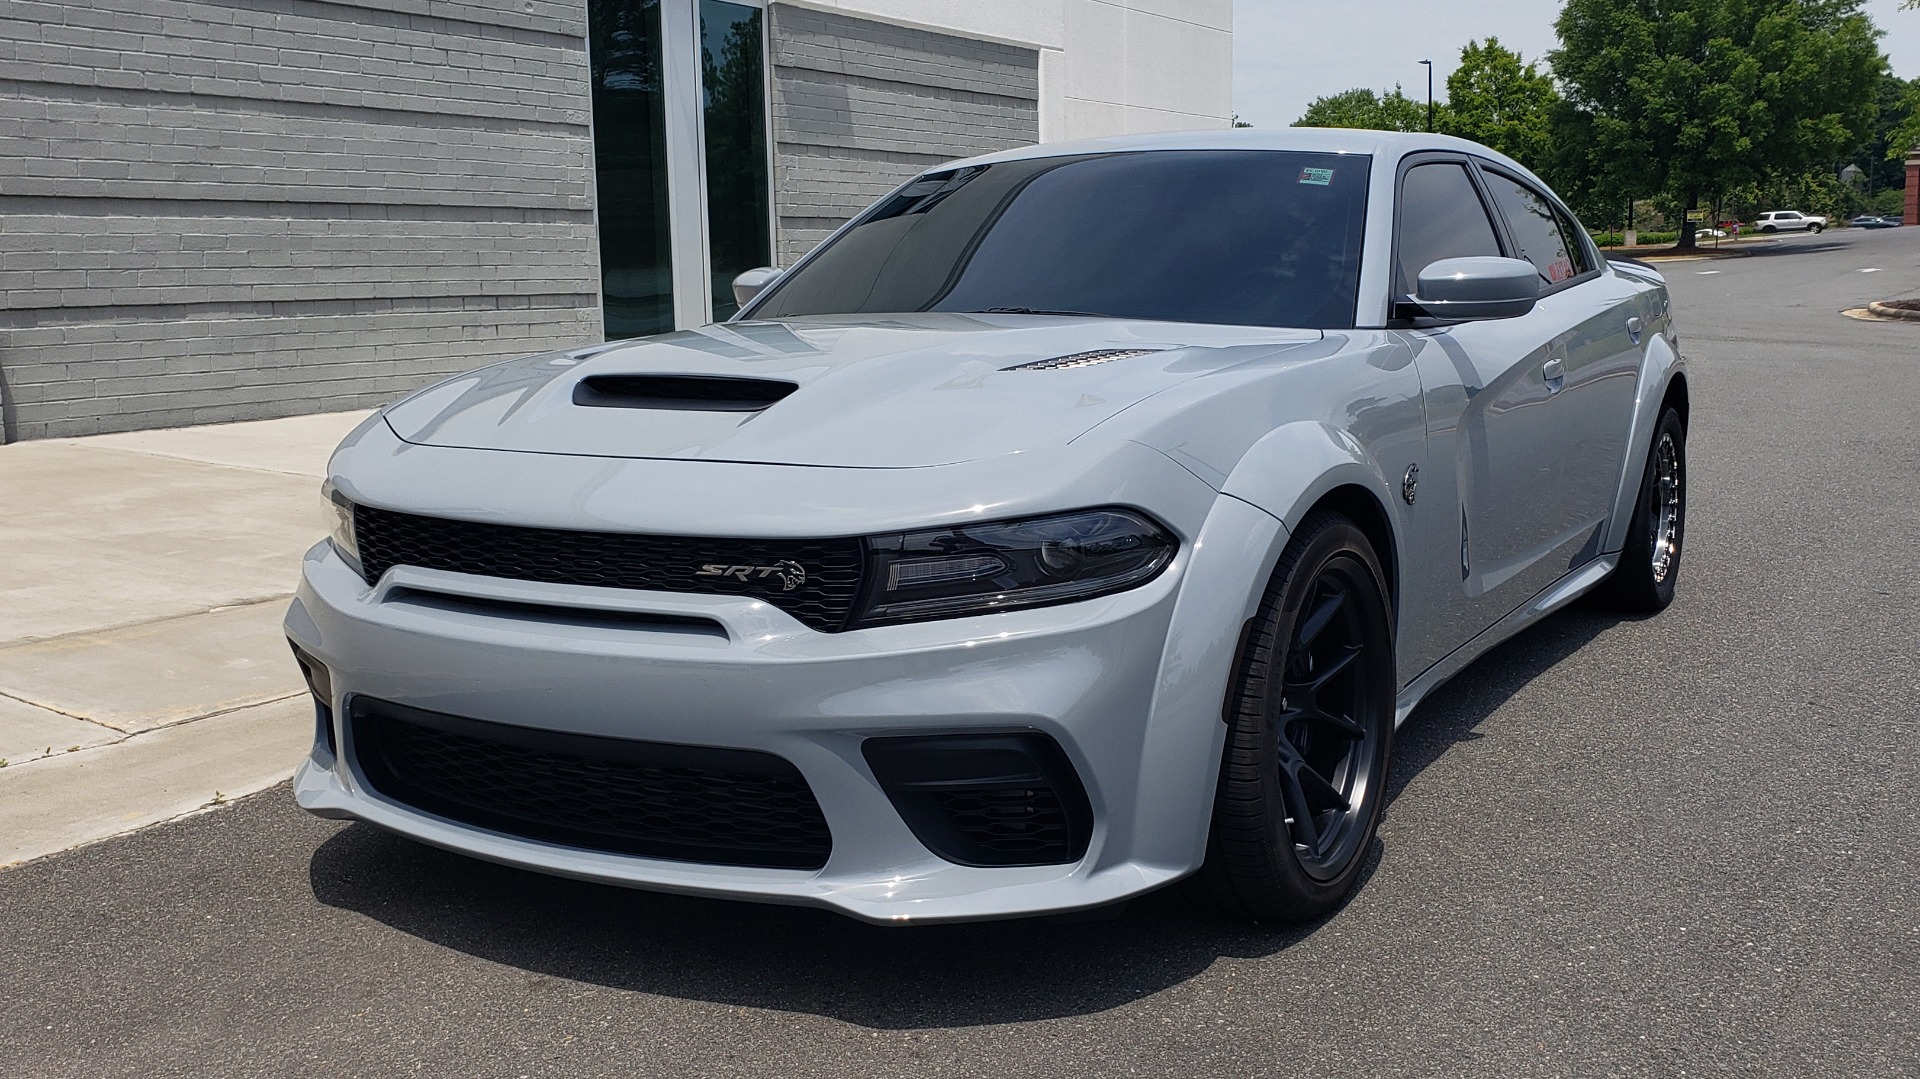 Used 2021 Dodge CHARGER SRT HELLCAT REDEYE WIDEBODY / CUSTOM TUNED 1100BHP for sale Sold at Formula Imports in Charlotte NC 28227 3